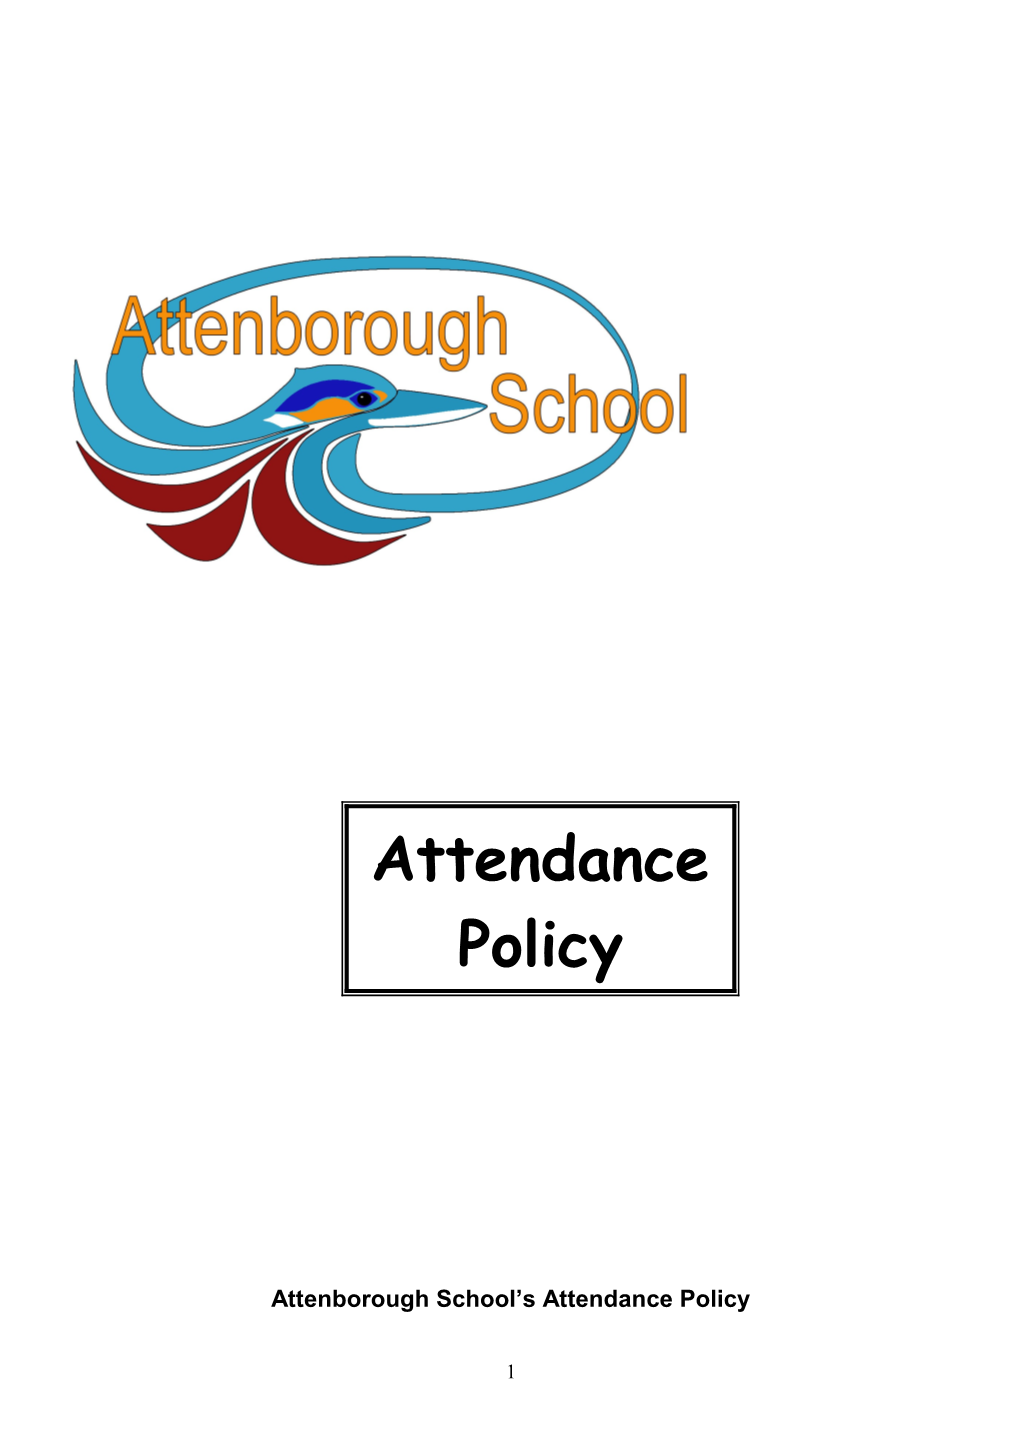 Tower School Attendance Policy